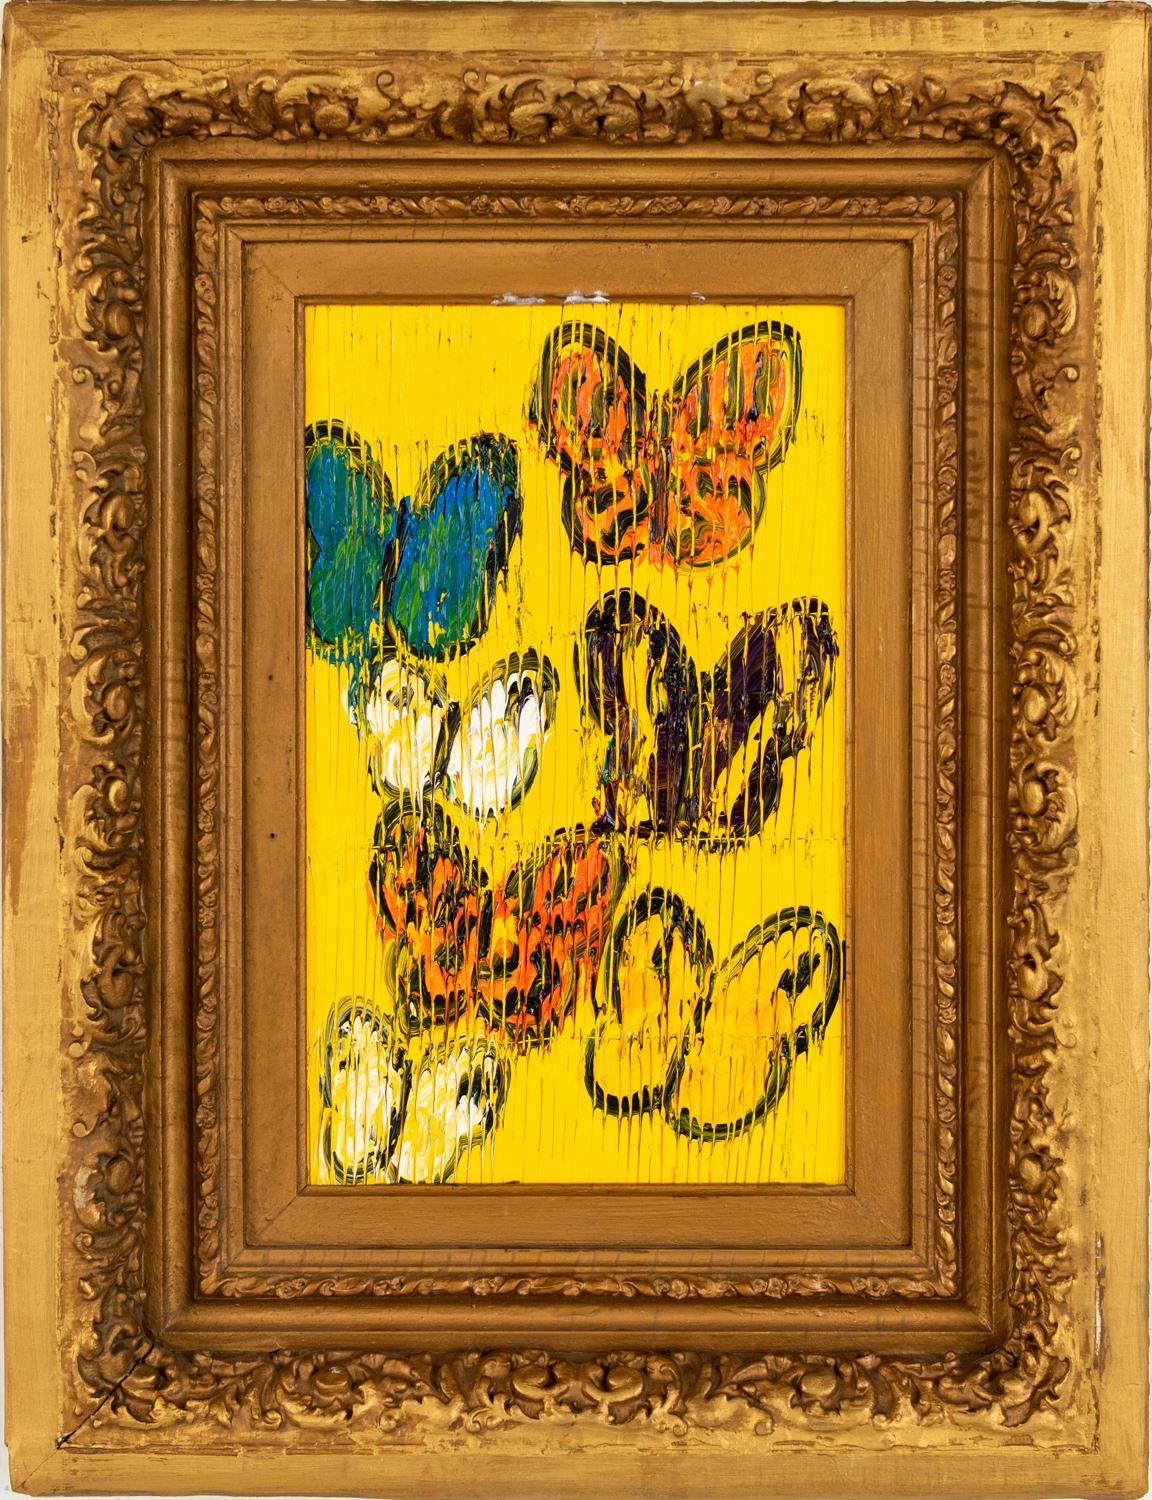 Hunt Slonem "Question mark & Comma (again)" Butterflies on Yellow
Multicolored butterflies on a yellow scored background in an antique gold wooden frame.

Unframed: 16.5 x 10.5 inches
Framed: 26.5 x 20.5 inches
*Painting is framed - Please note Hunt